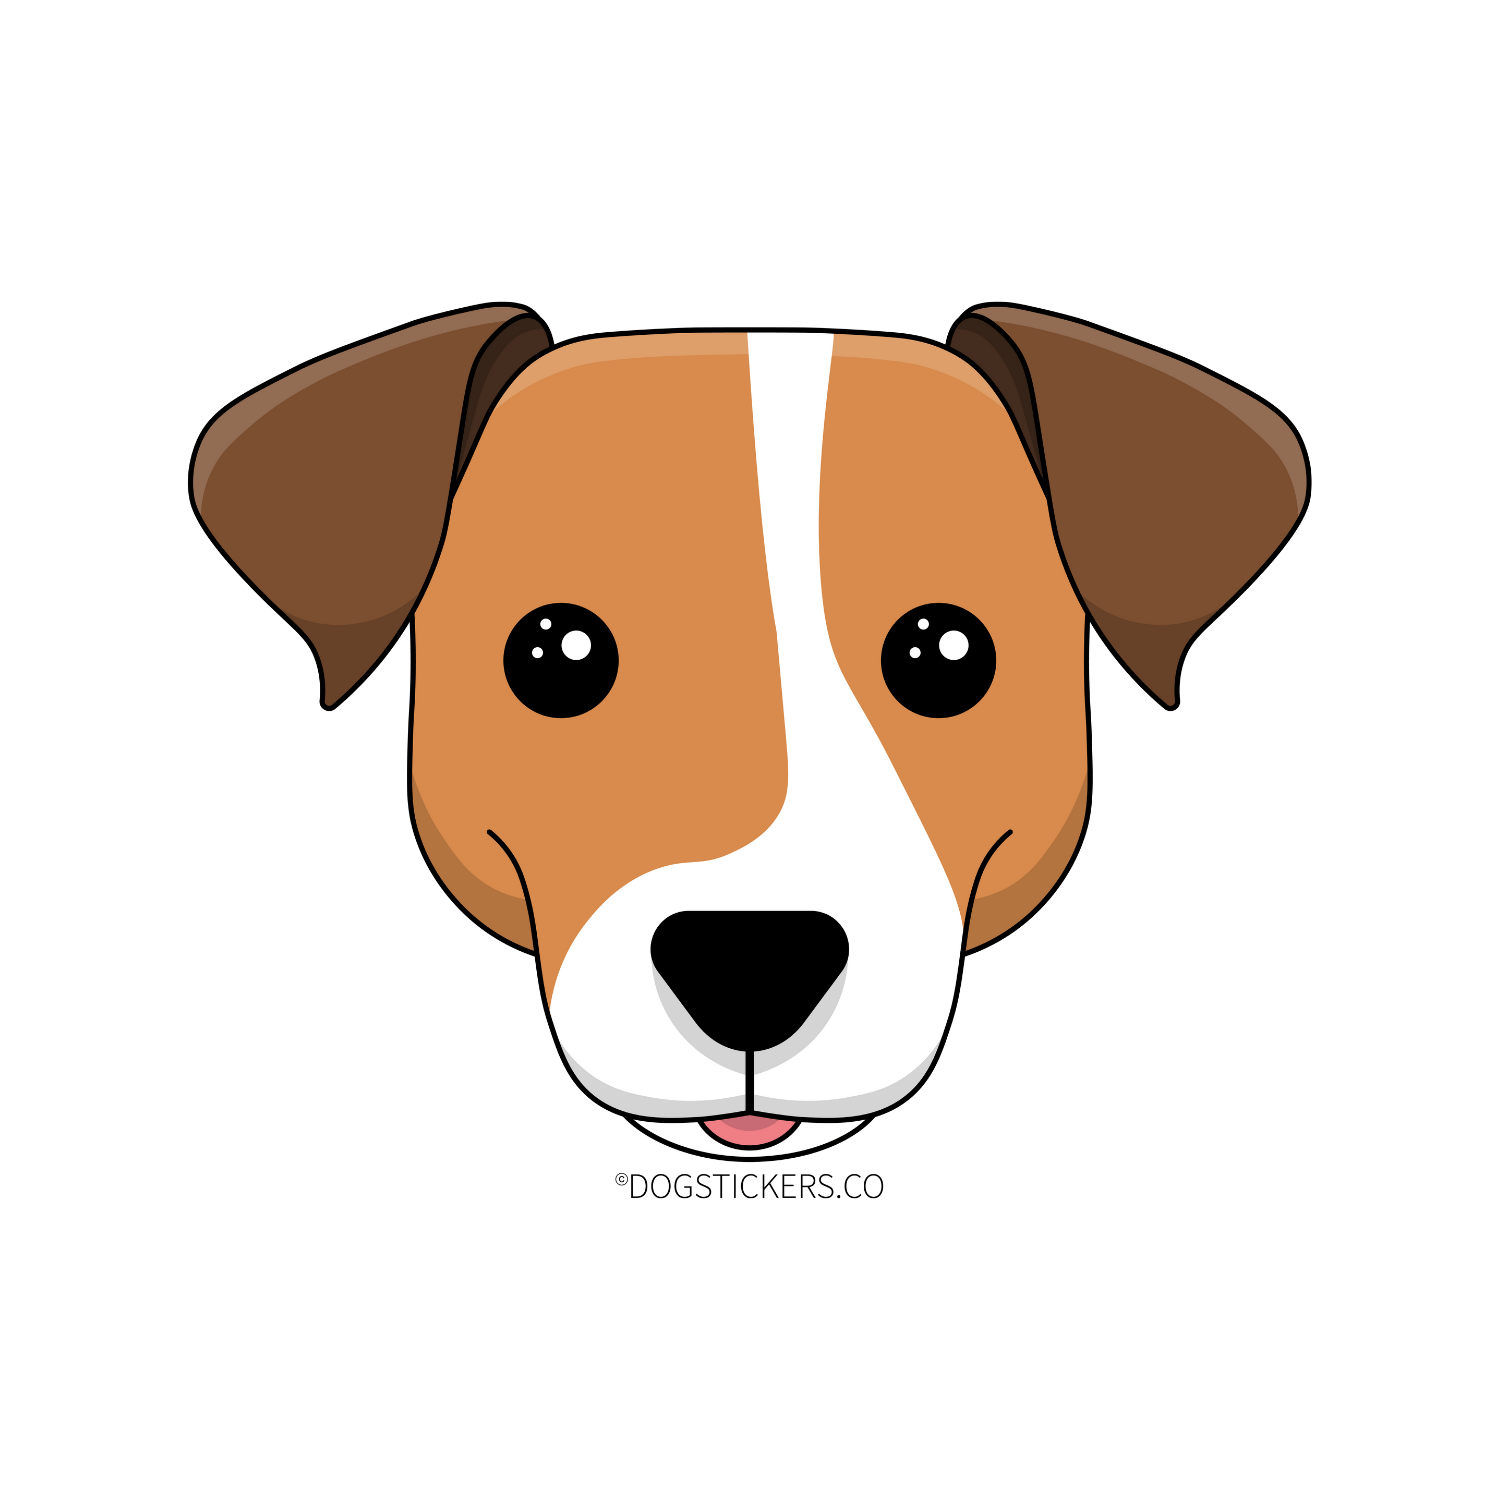 Jack Russell Terrier Dog Sticker - Dogstickers.co